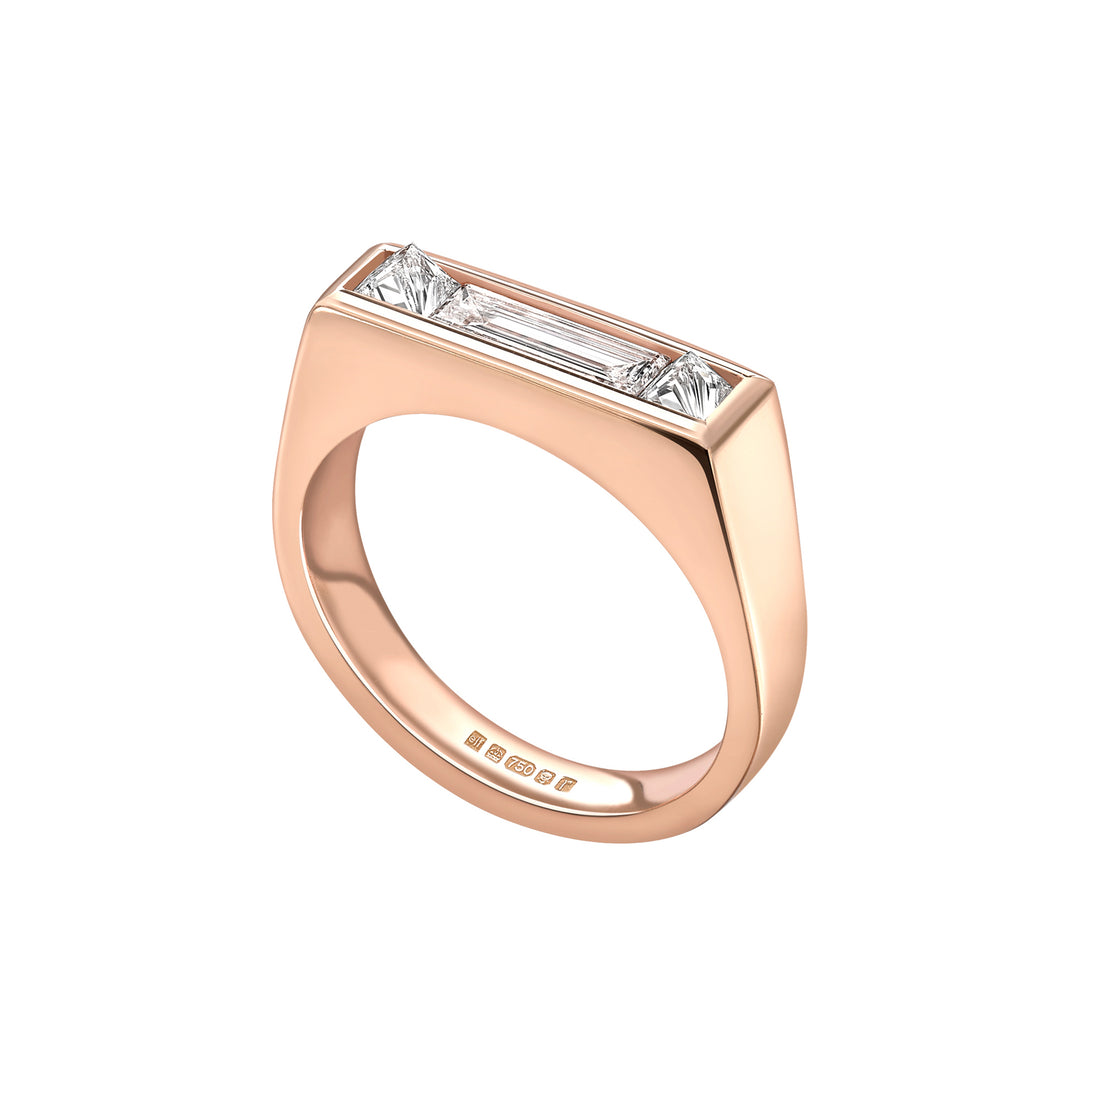  Minimal Rose Gold Engagement Ring by Emma Franklin | The Cut London